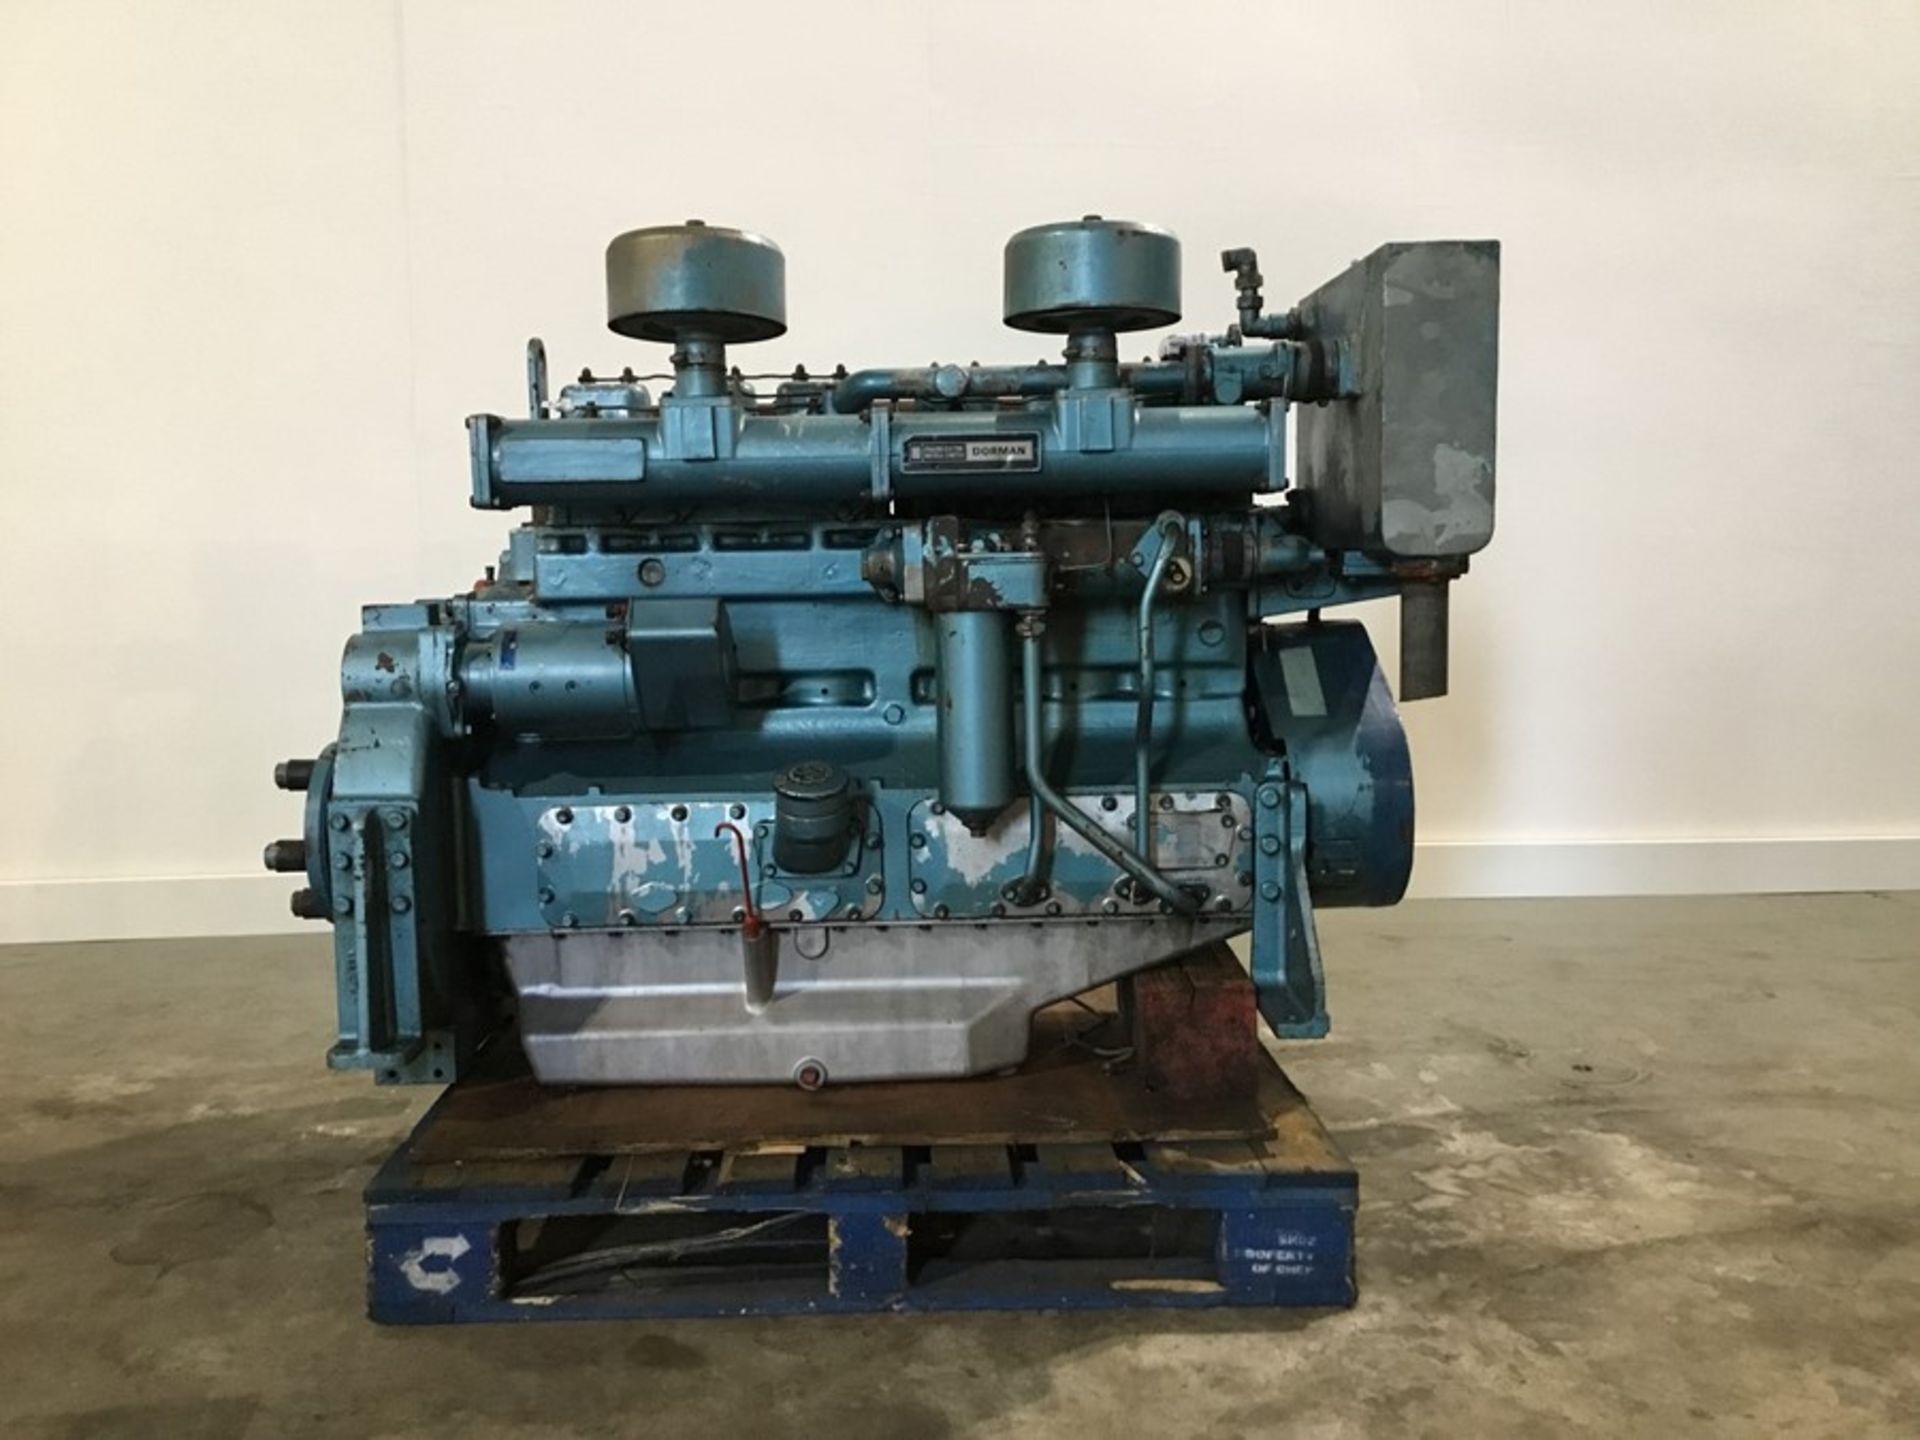 Dorman 6LE Diesel Engine: Dorman 6LE 6cyl Non turbo Serial number 100765 used - Image 2 of 15